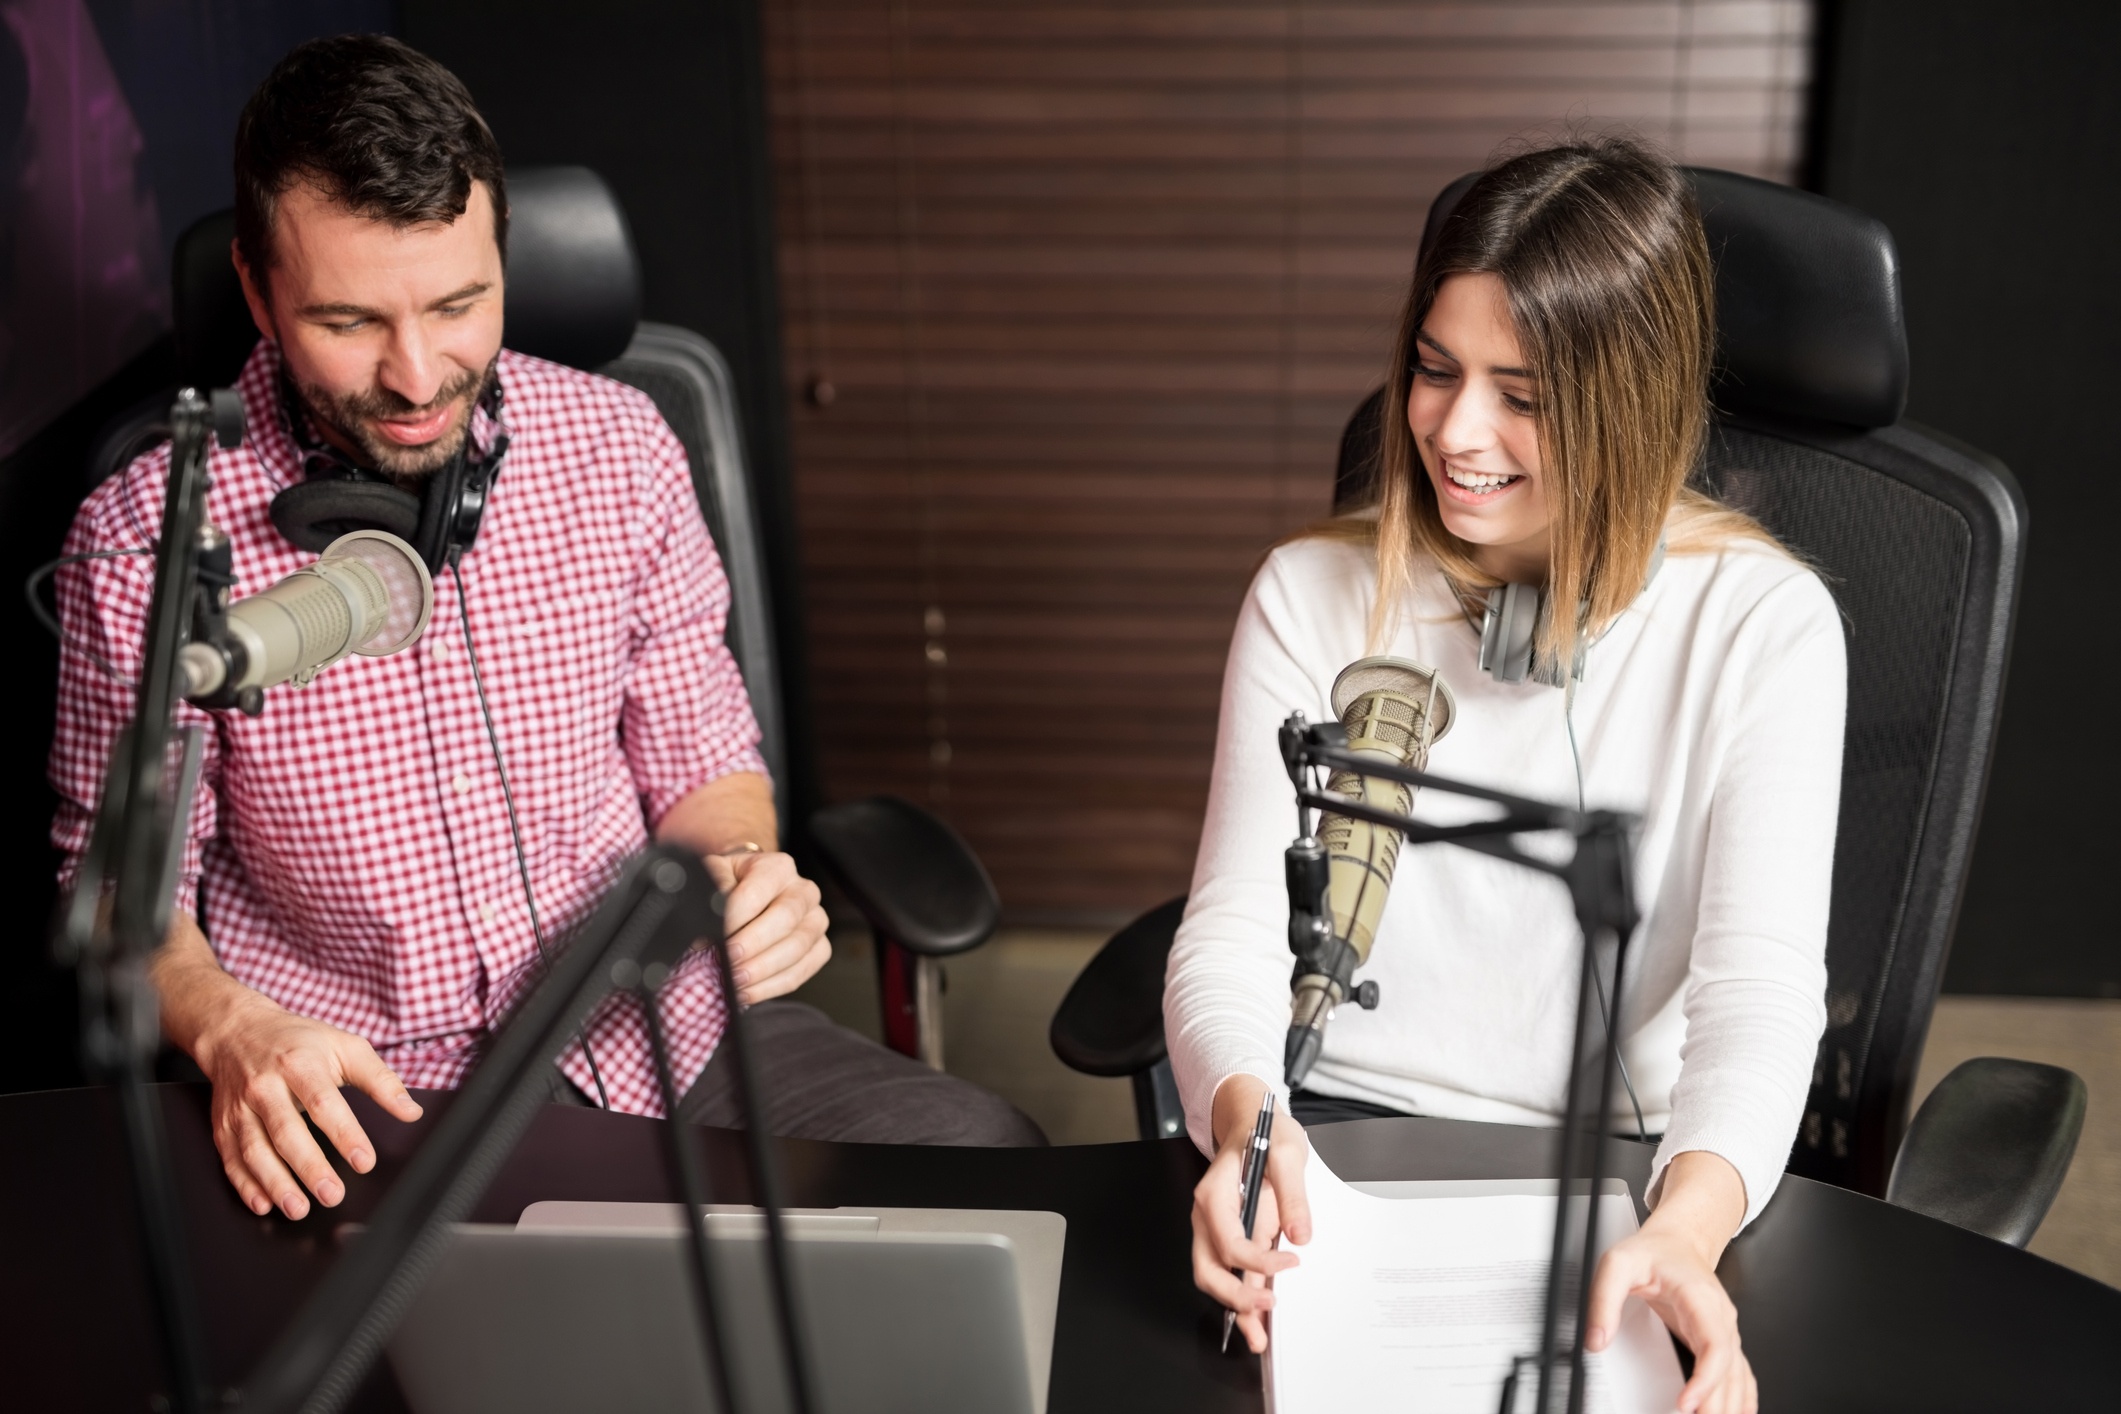 6 Ways Radio Personalities are Making Meaningful Connections in the Chicago Community